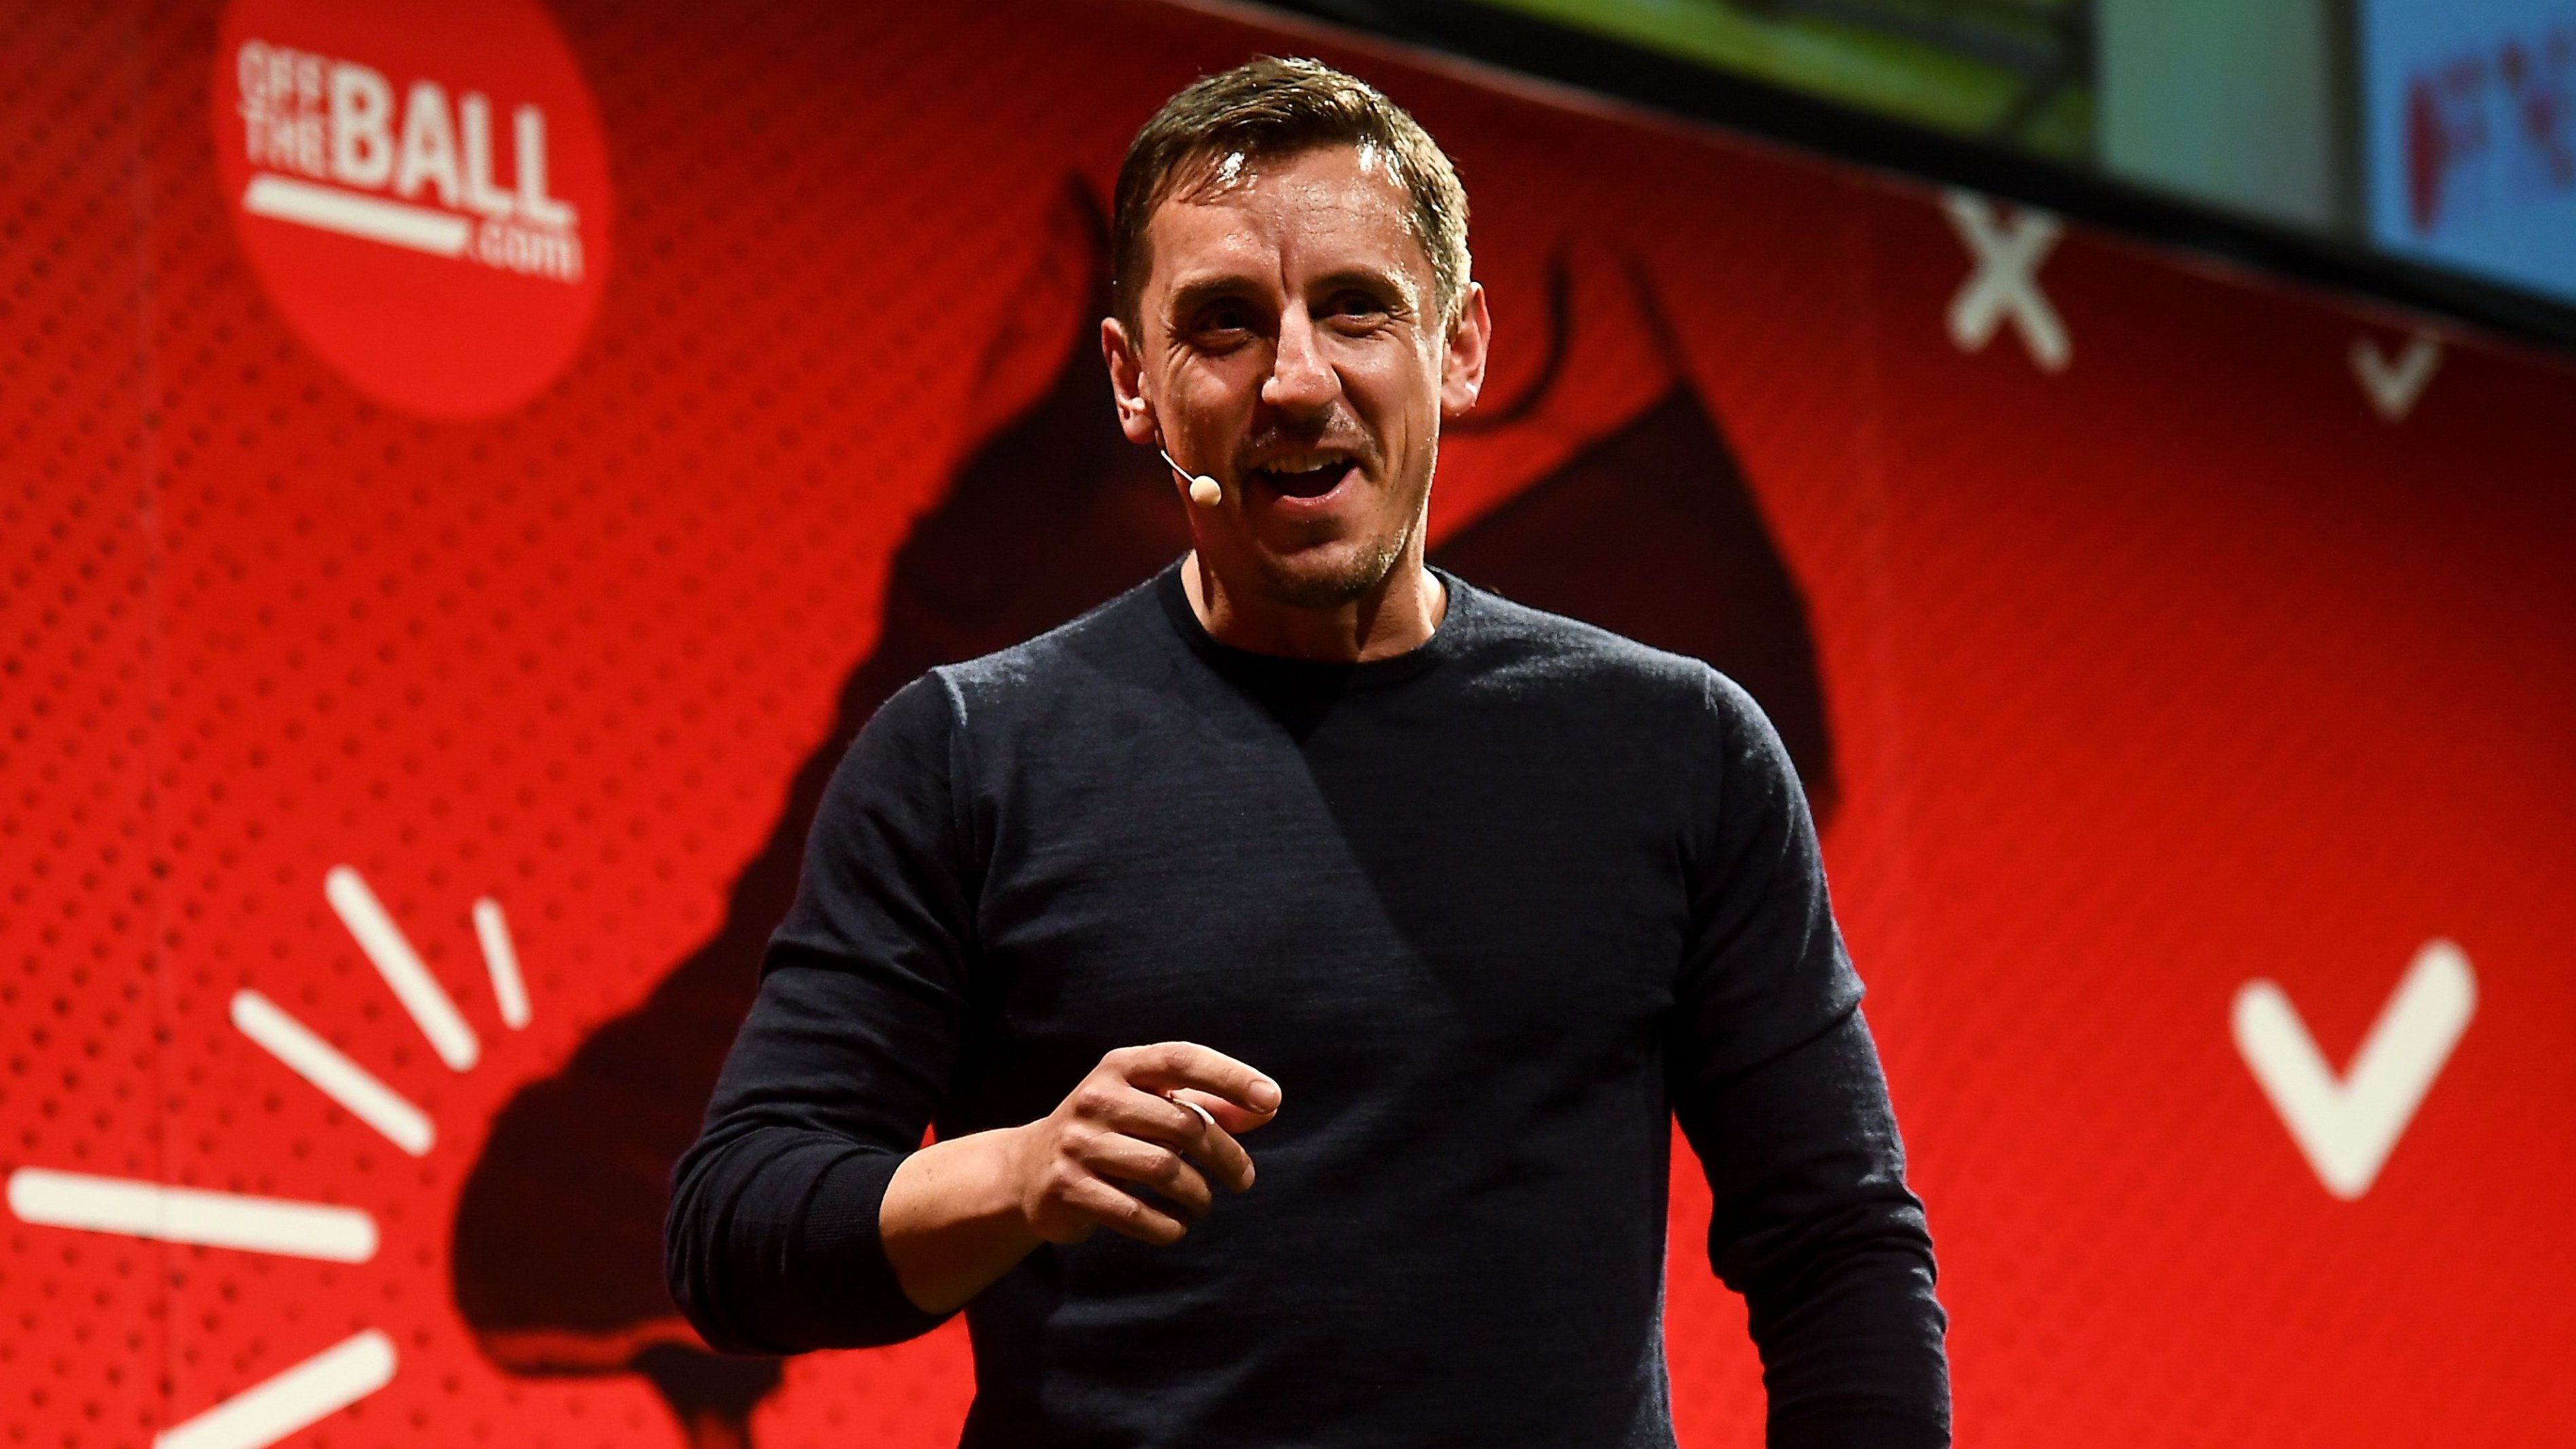 Gary Neville: “I am an all or nothing type person. So my view is, if you are going to launch something internationally, or do something even in a different city in this country, you have to commit”